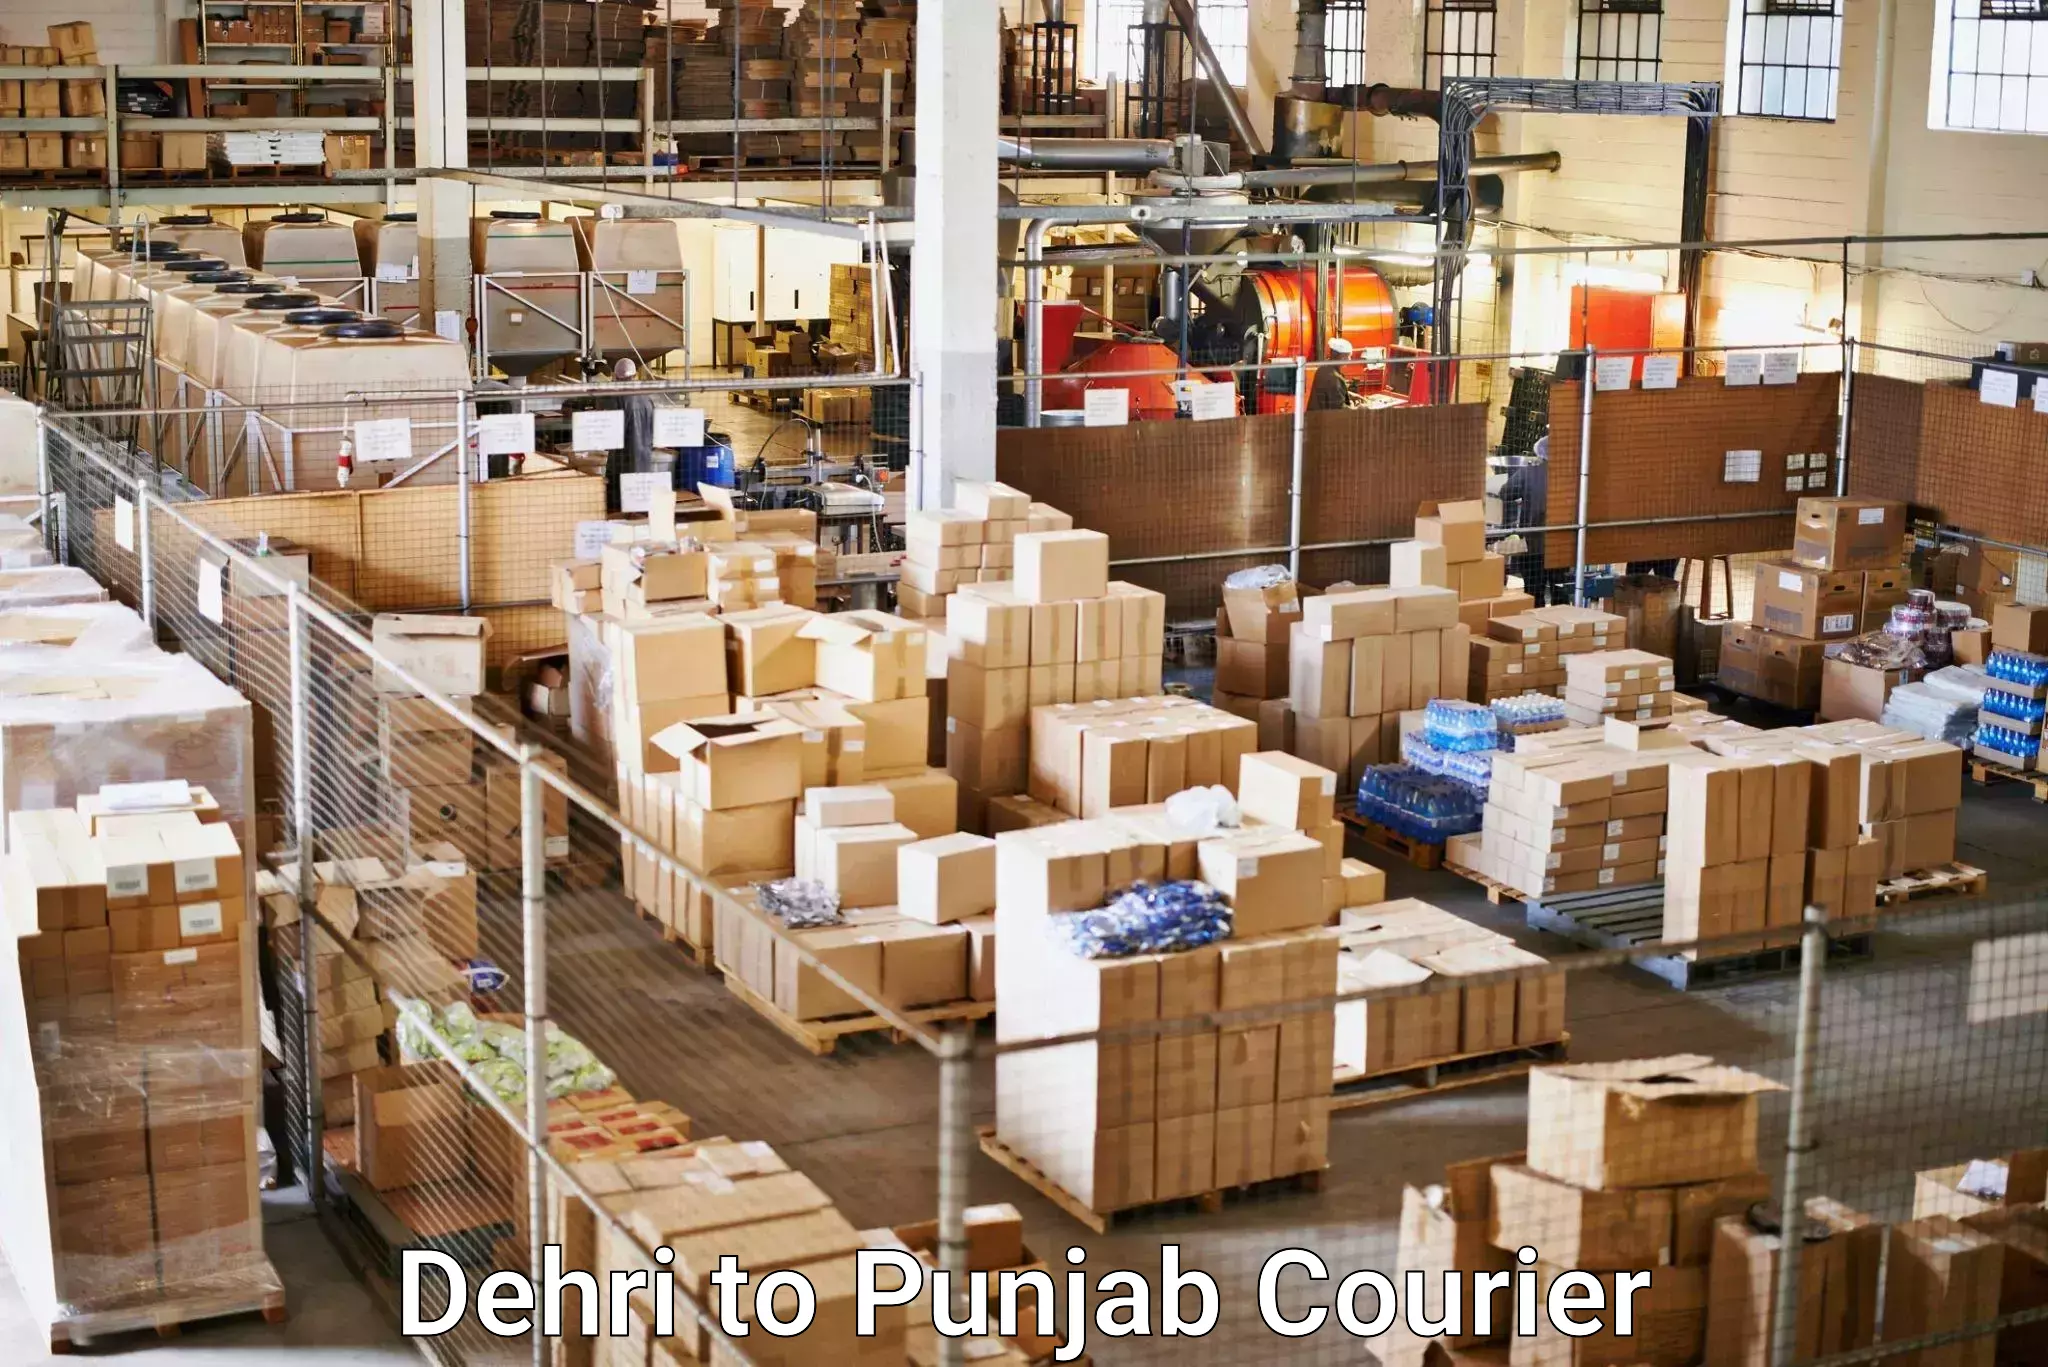 Same-day delivery options Dehri to Punjab